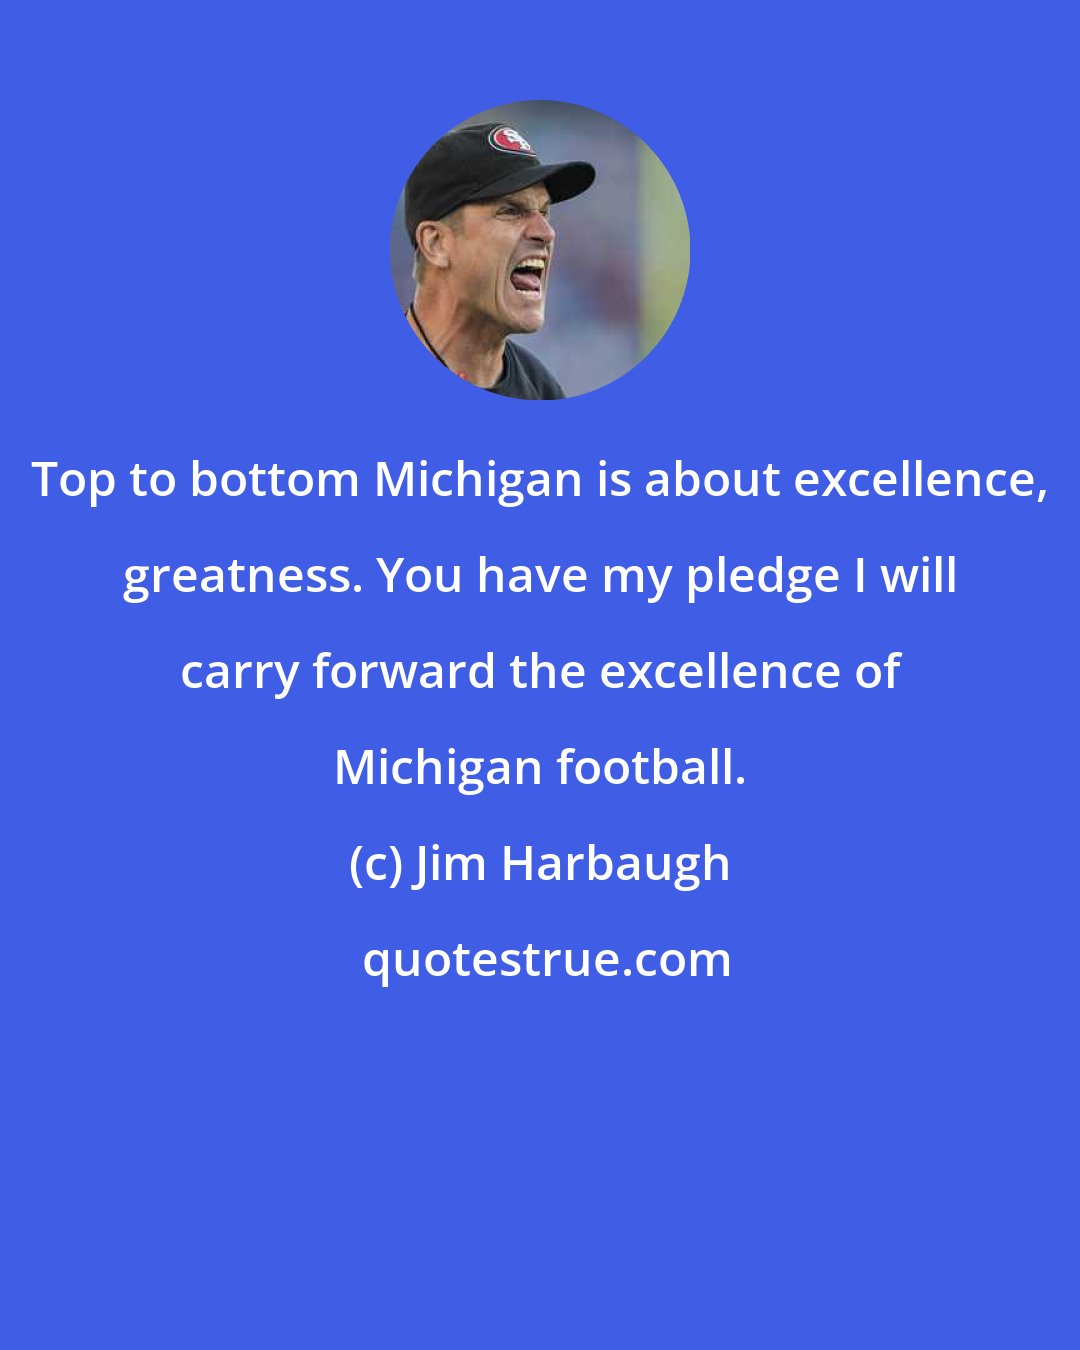 Jim Harbaugh: Top to bottom Michigan is about excellence, greatness. You have my pledge I will carry forward the excellence of Michigan football.